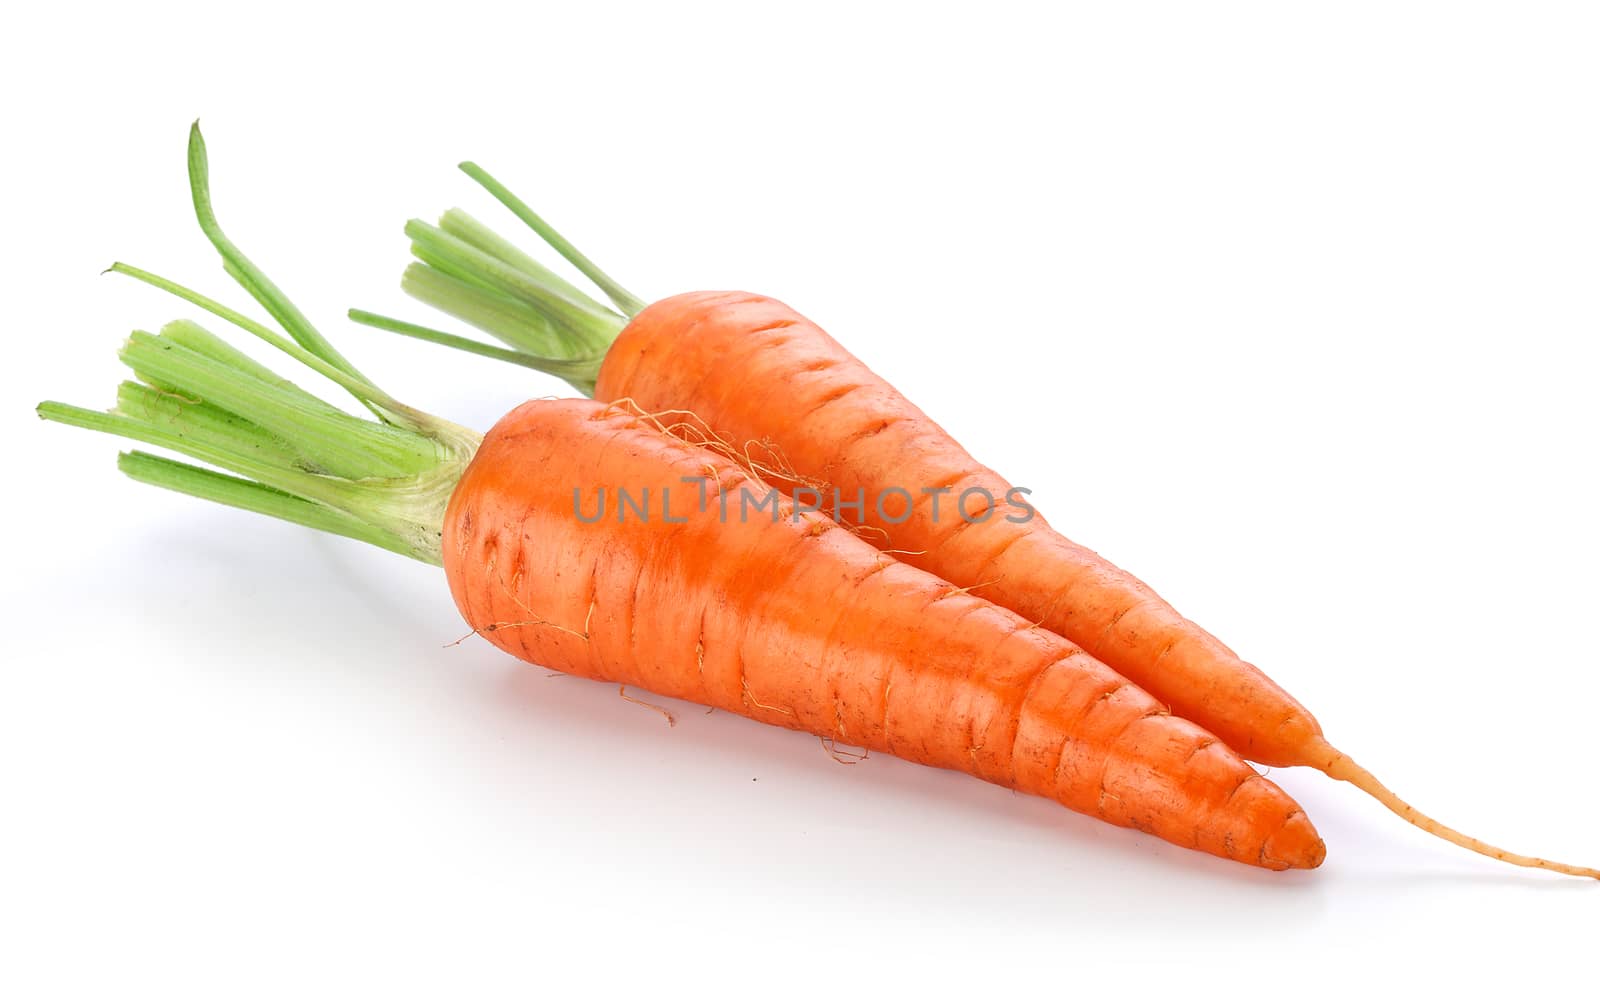 Isolated two fresh whole raw carrots on the white background